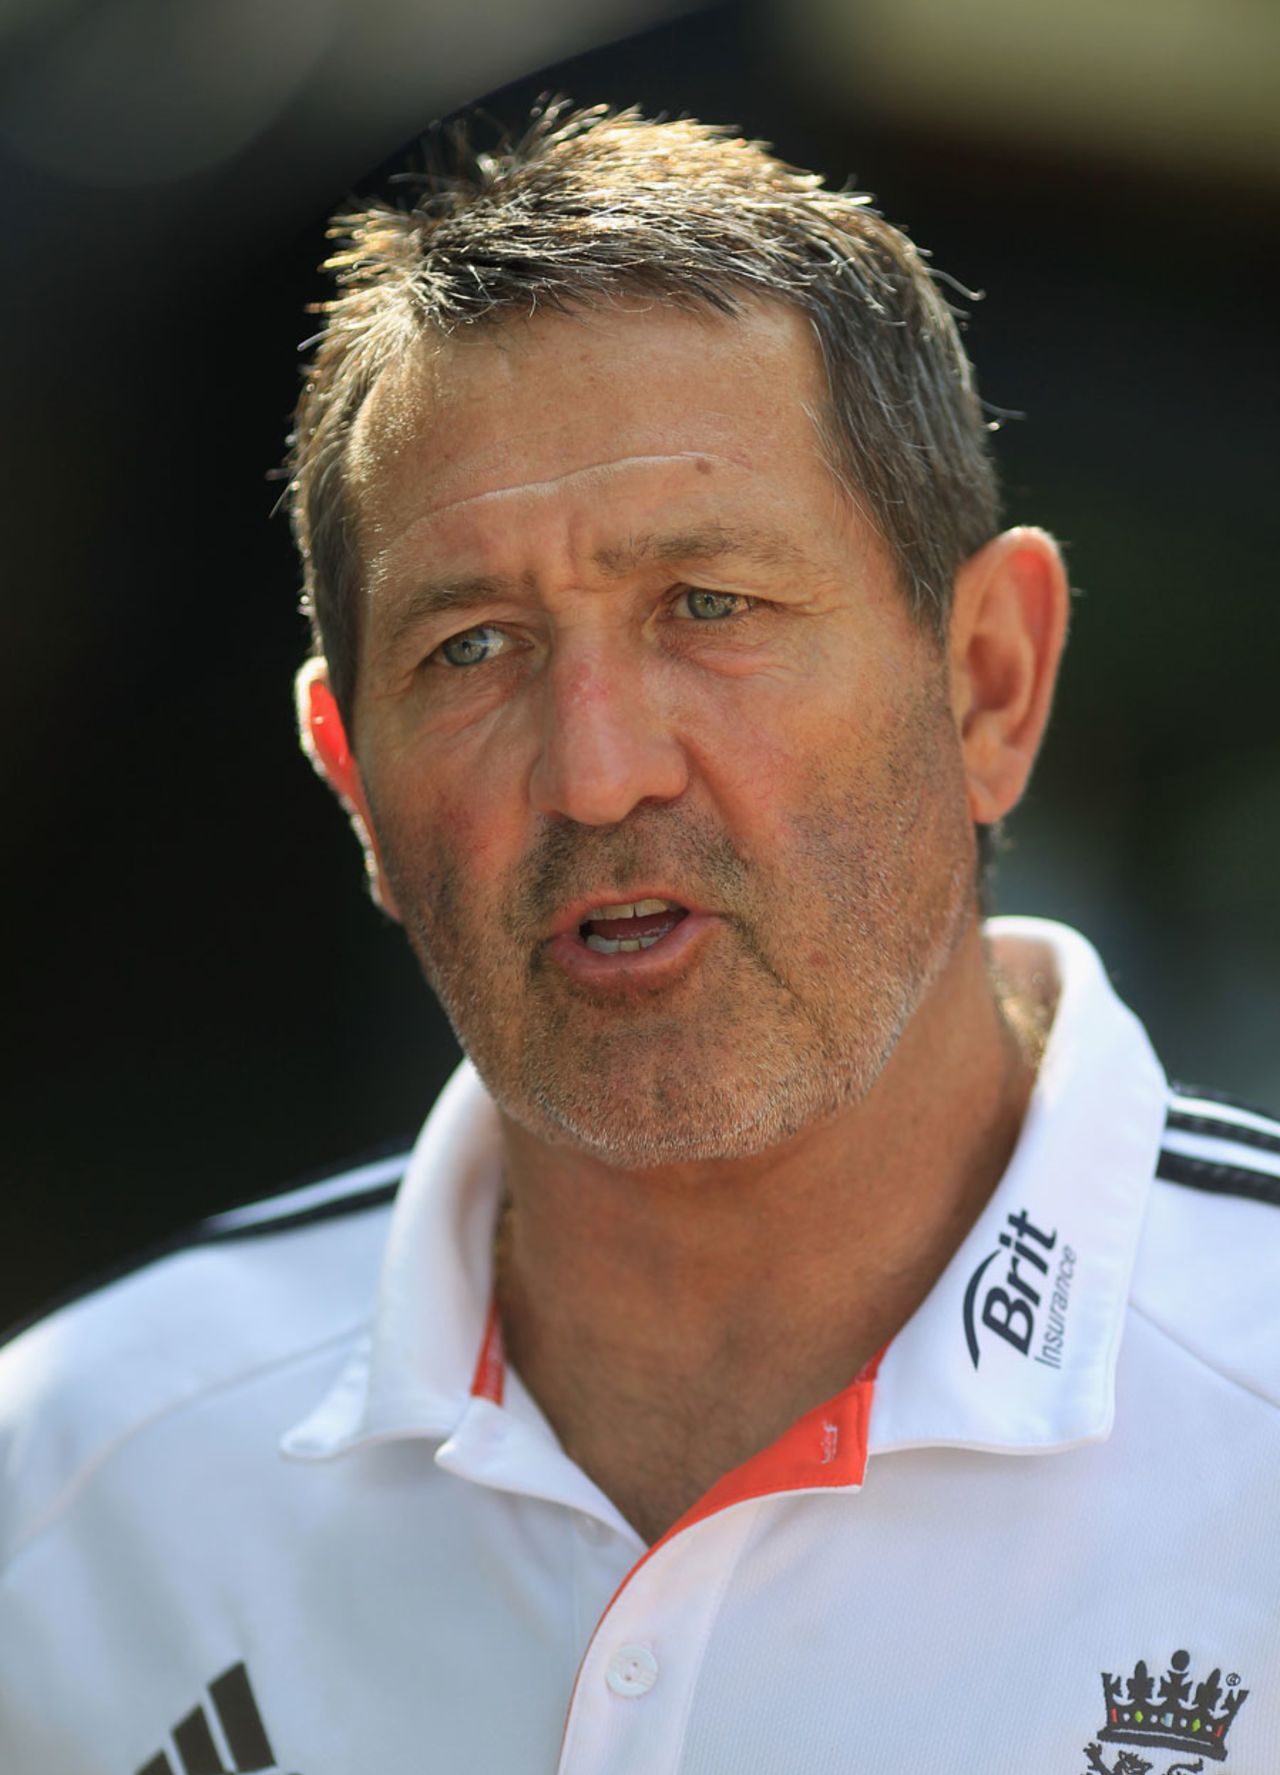 Graham Gooch speaks at an England press conference on England's tour of Sri Lanka, Ahungalla, March 30, 2012